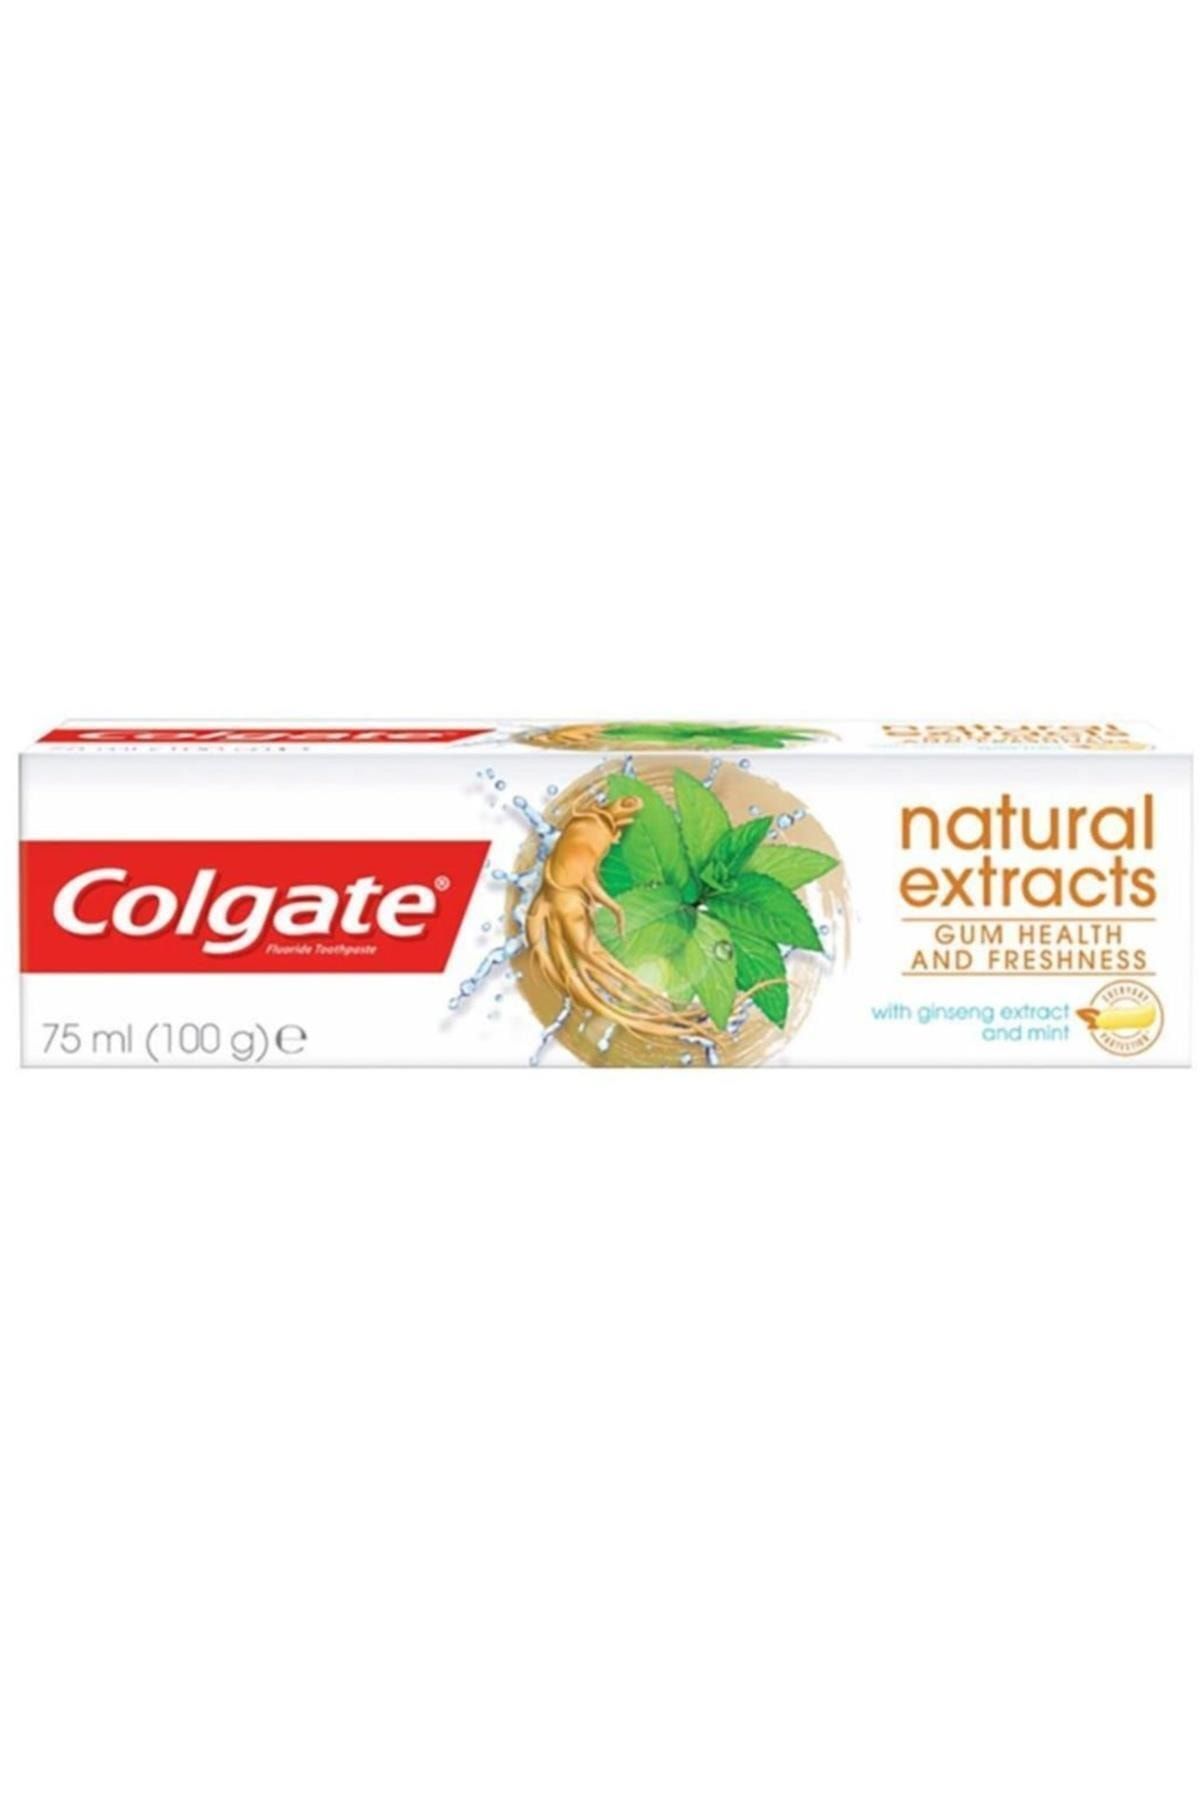 Colgate Natural Extracts Ginseng & Mint Toothpaste Diş Macunu 75 ml